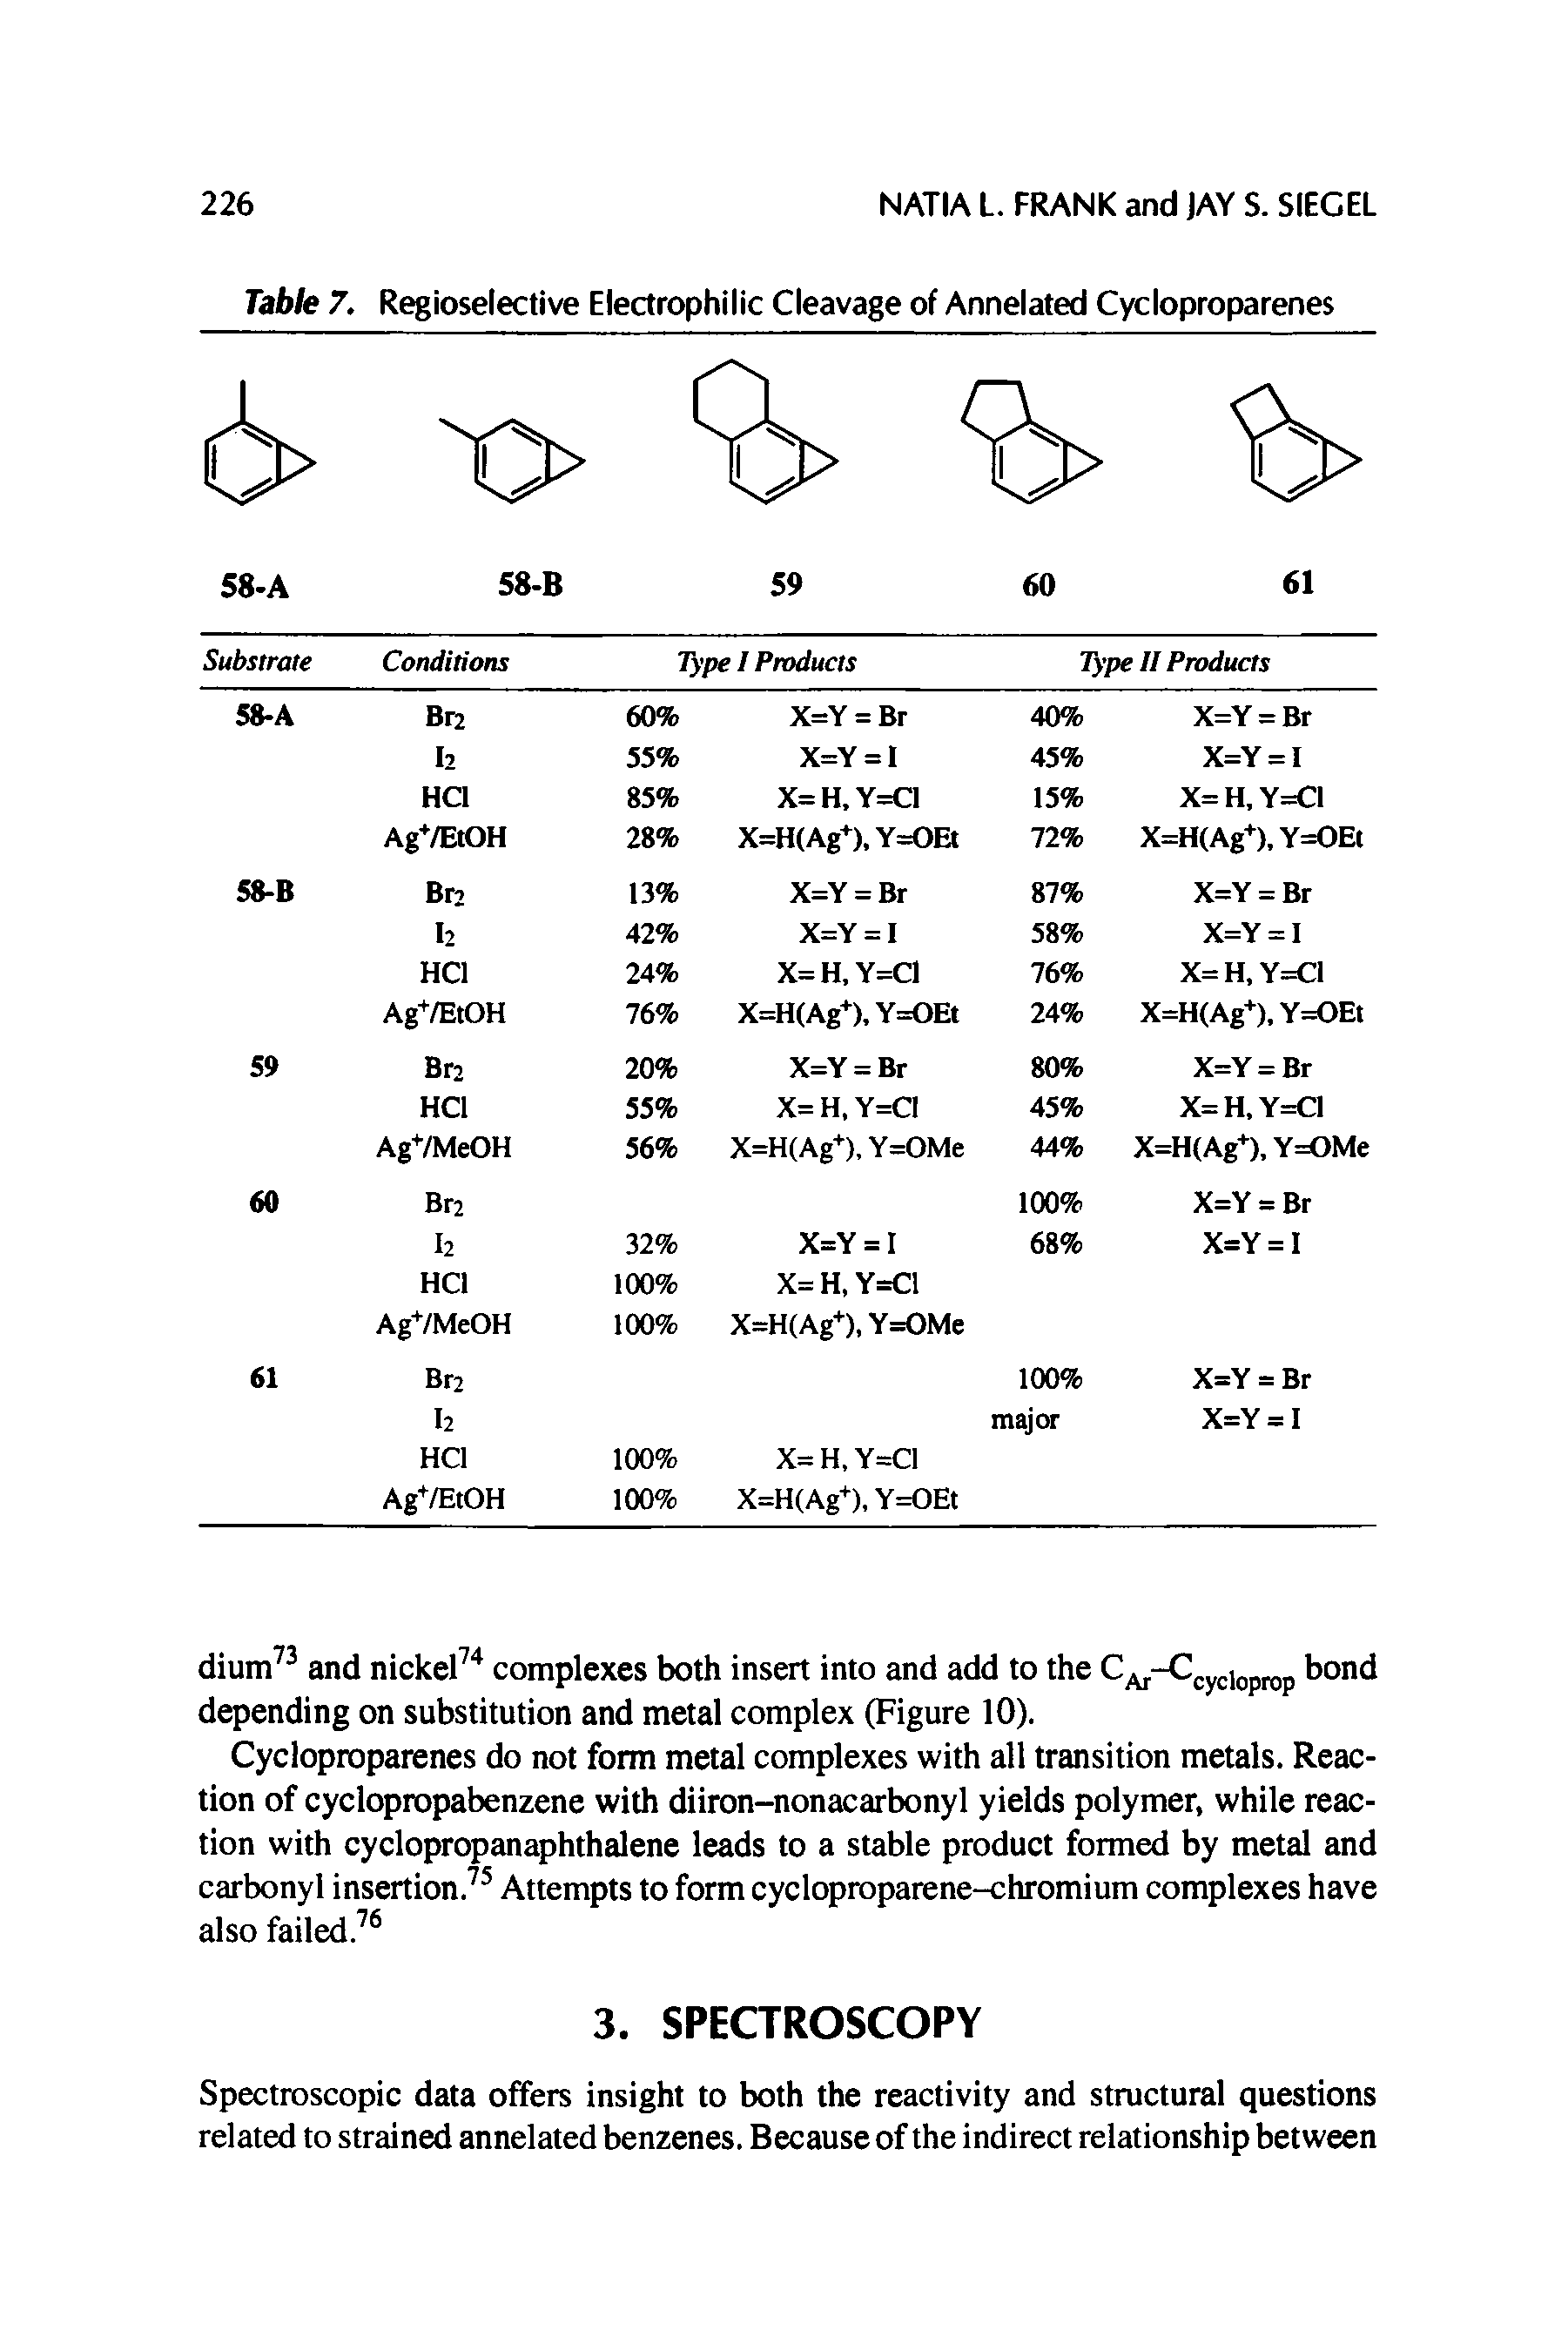 Table 7. Regioselective Electrophilic Cleavage of Annelated Cycloproparenes...